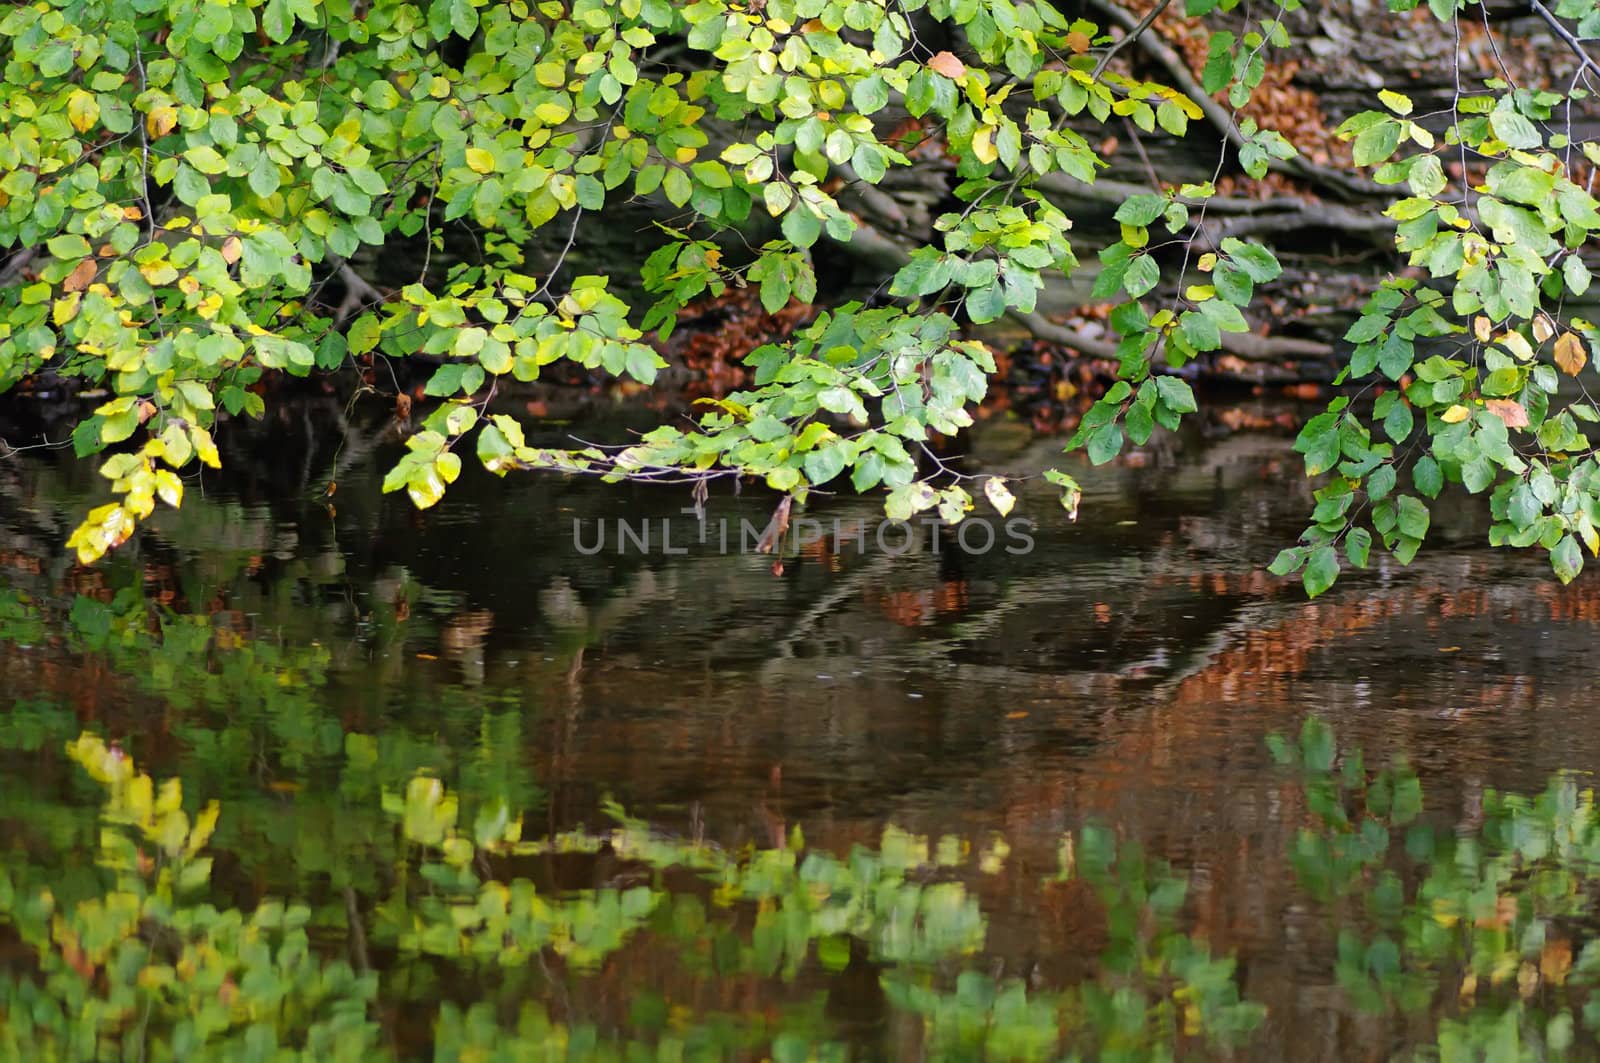 A tree with leaves mirrored on the surface of a stream